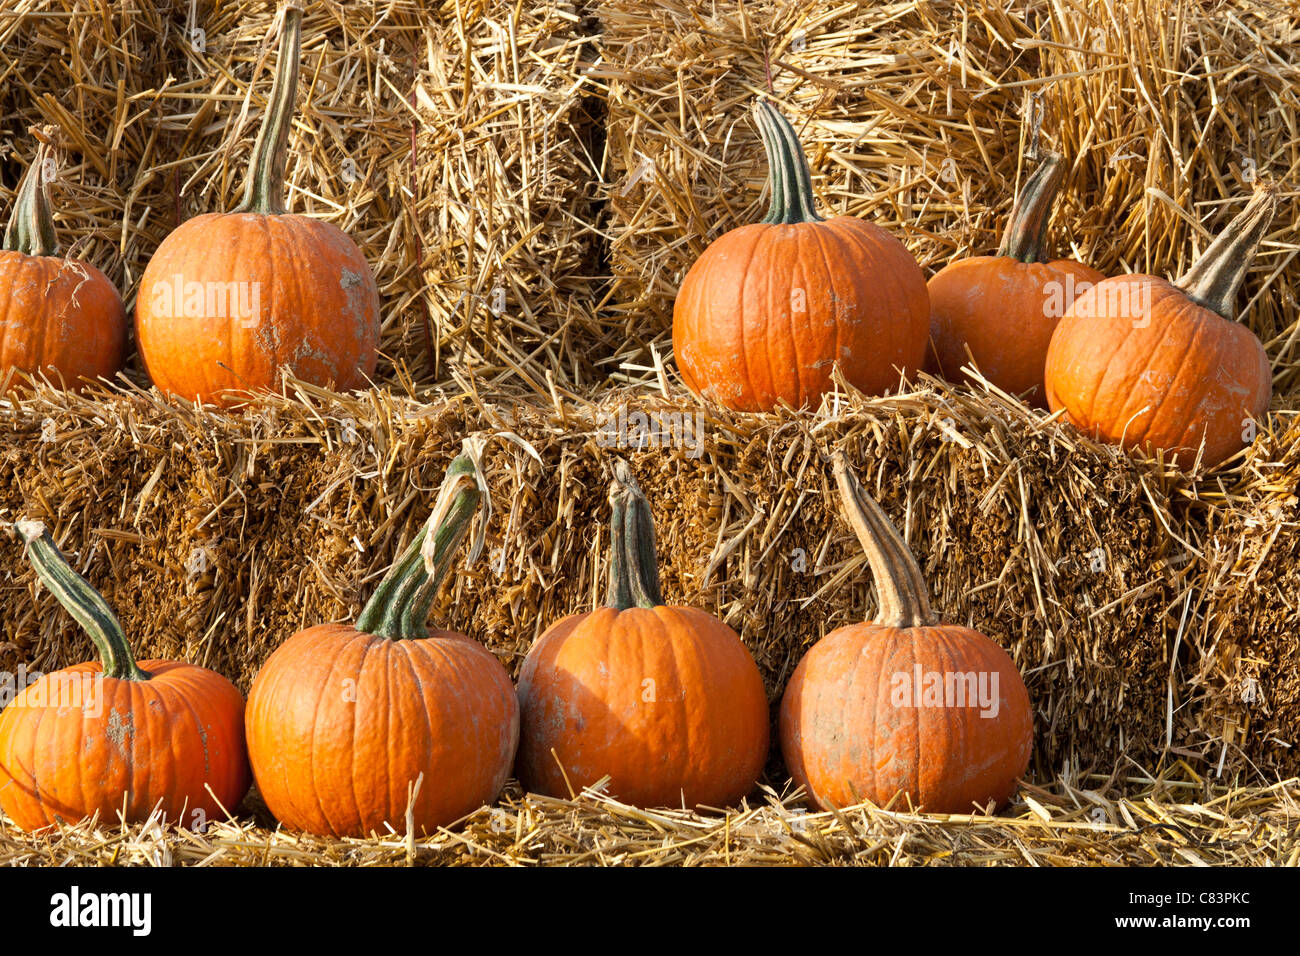 Pumpkins On Hay Bales For Sale At Farm Market Stock Photo Alamy